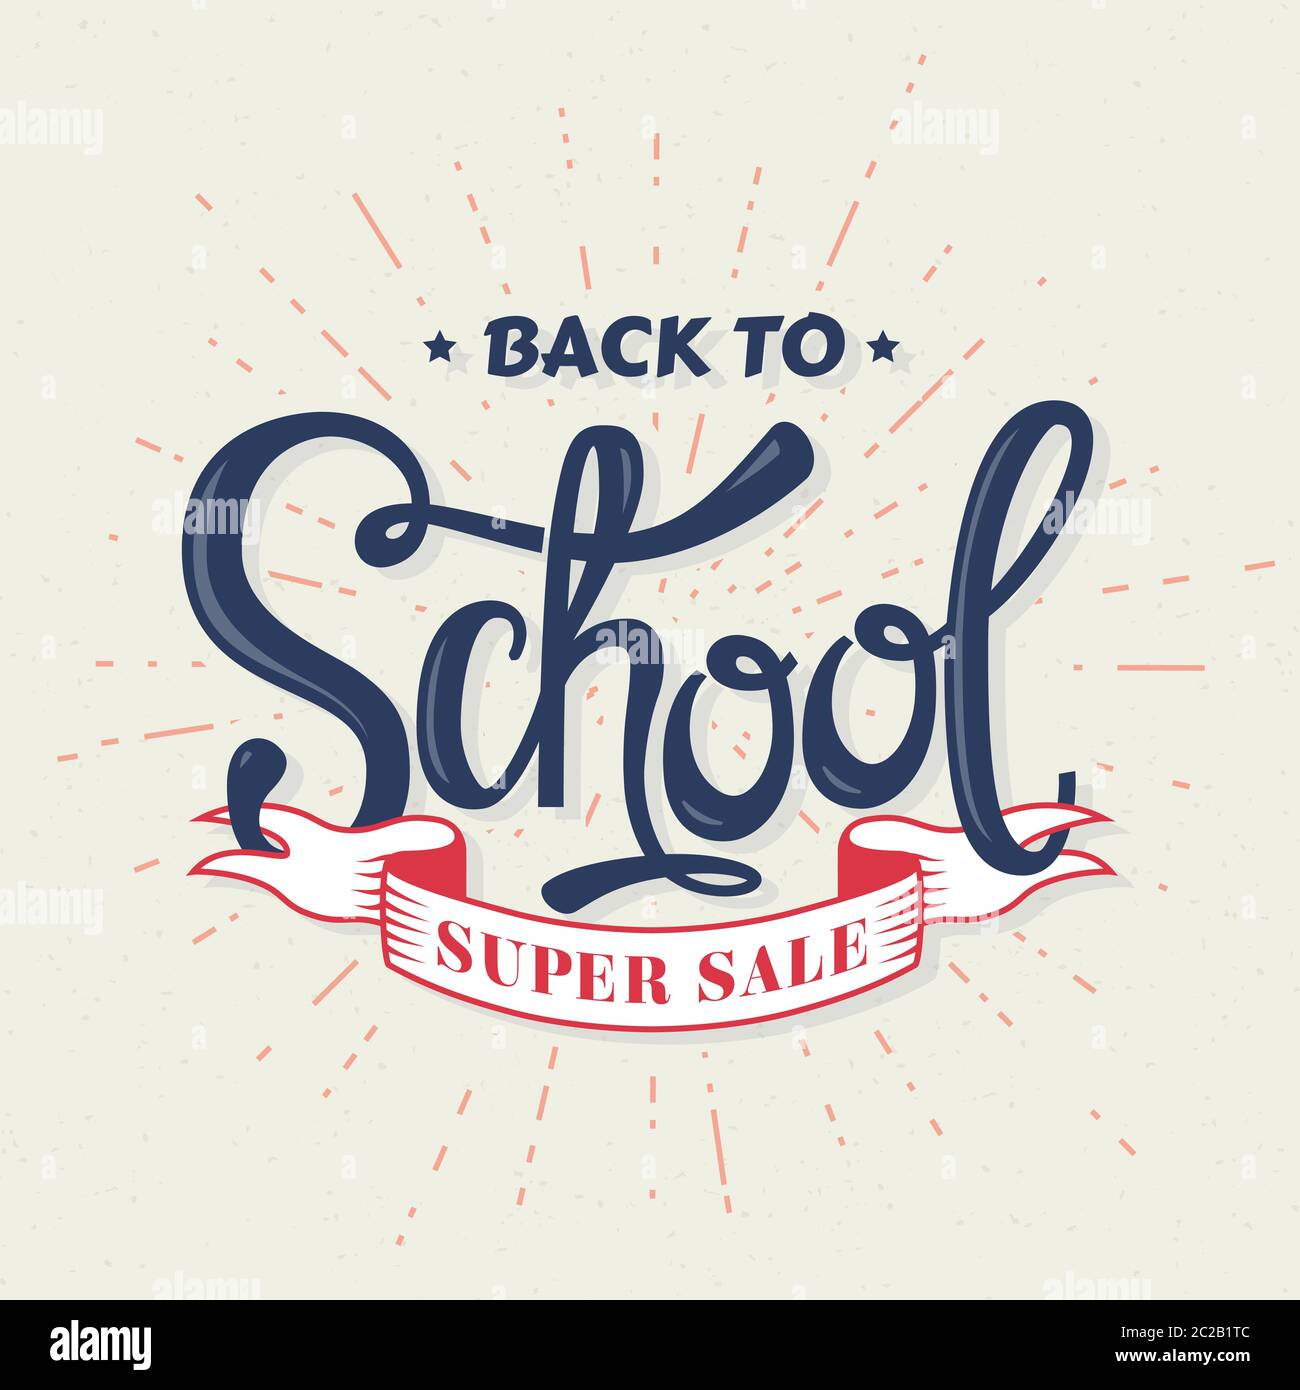 Back to school sale banner. Vector background with lettering and bursting rays. Stock Vector